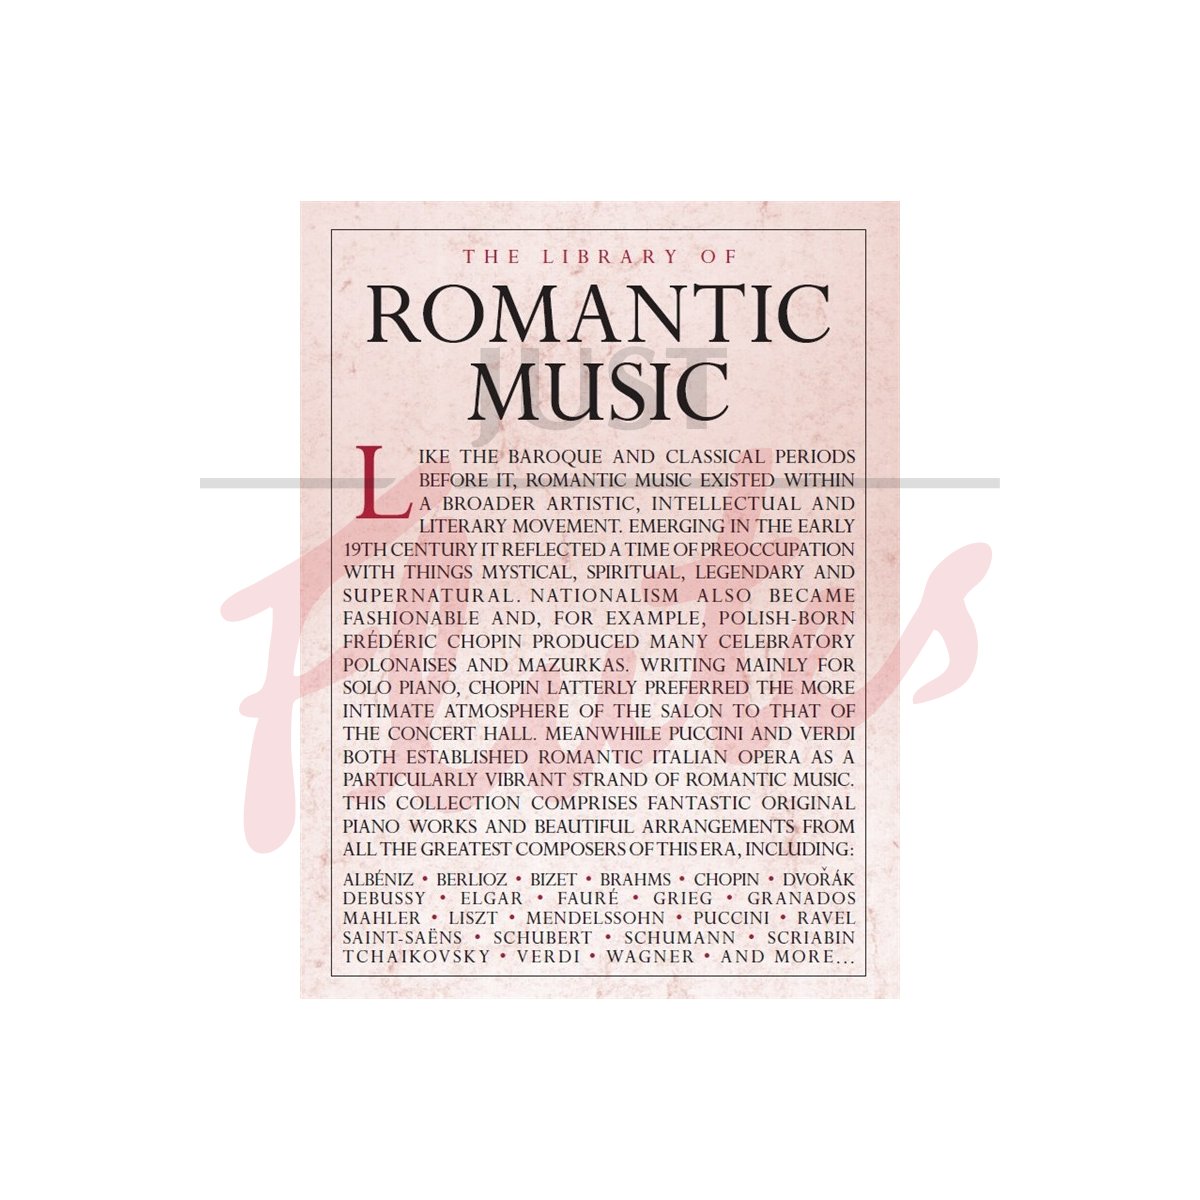 The Library of Romantic Music